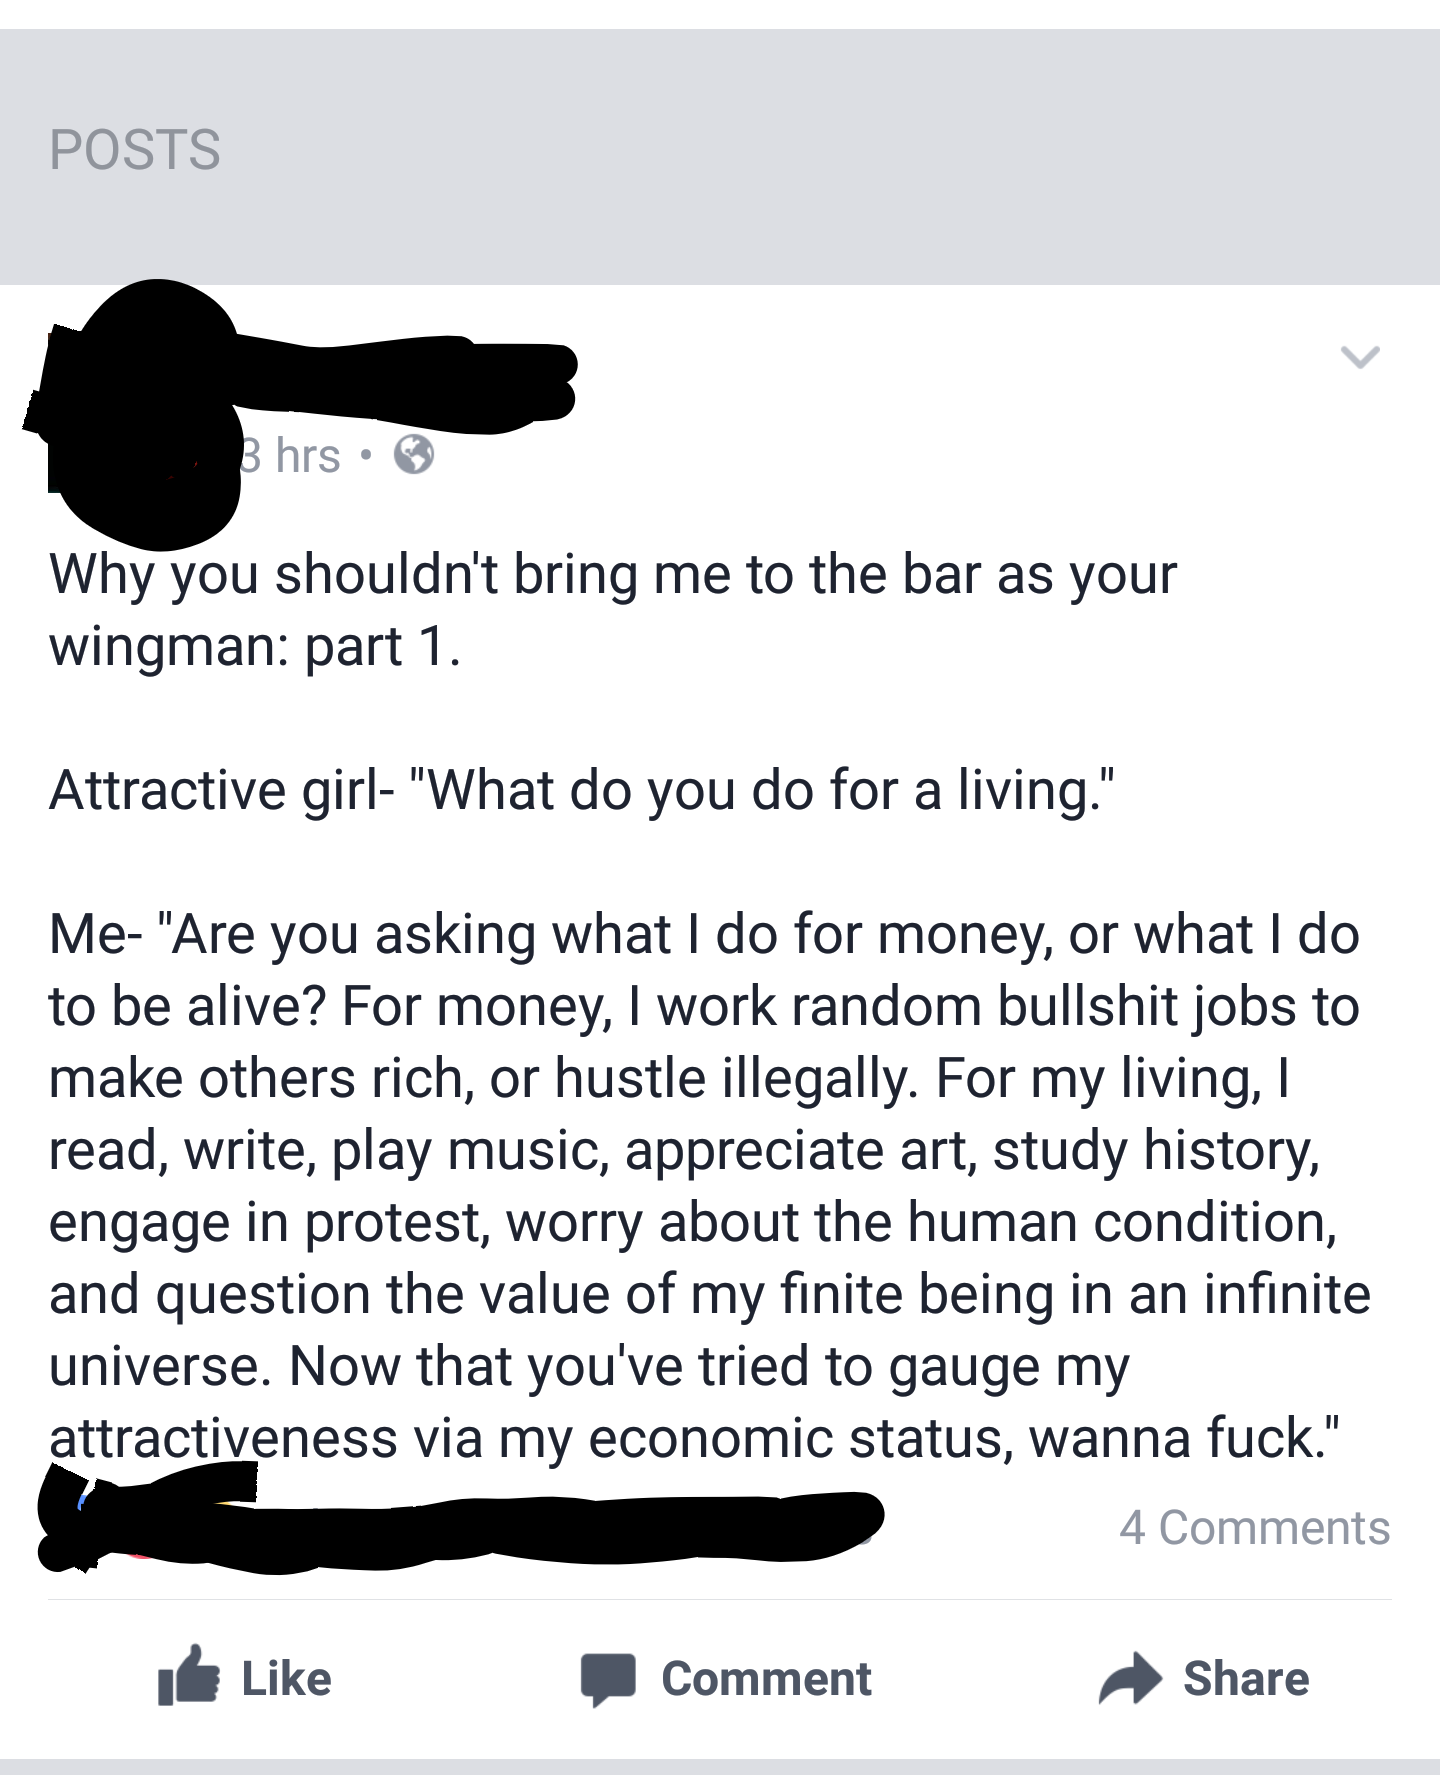 angle - Posts 3 hrs Why you shouldn't bring me to the bar as your wingman part 1. Attractive girl "What do you do for a living." Me "Are you asking what I do for money, or what I do to be alive? For money, I work random bullshit jobs to make others rich, 